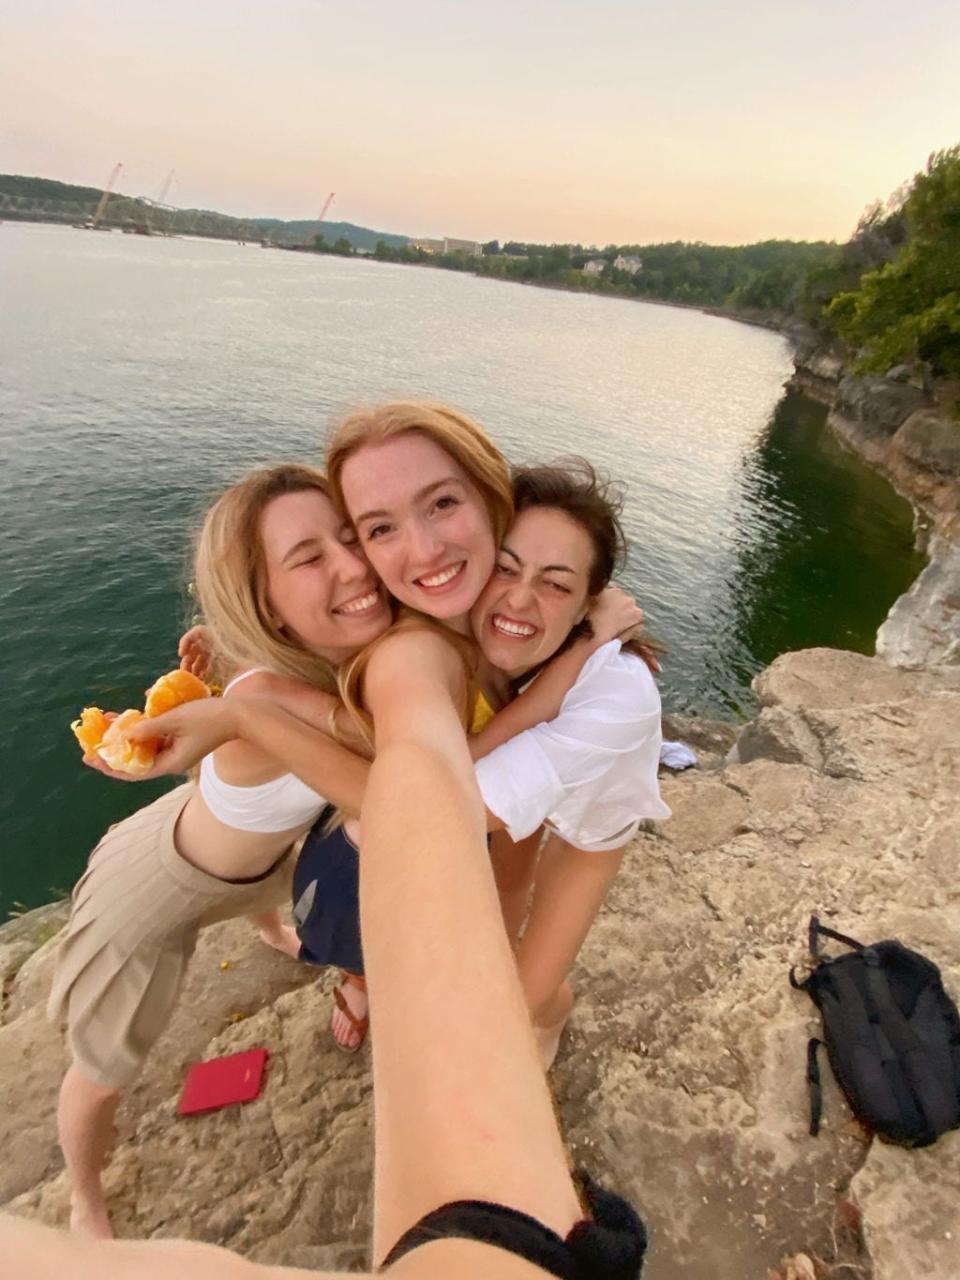 From left to right, Verve Reposar, Paige Jones and Hannah Herzog smile for a selfie during production of "Odd Fellows," Citrus Studios' new feature-length film.